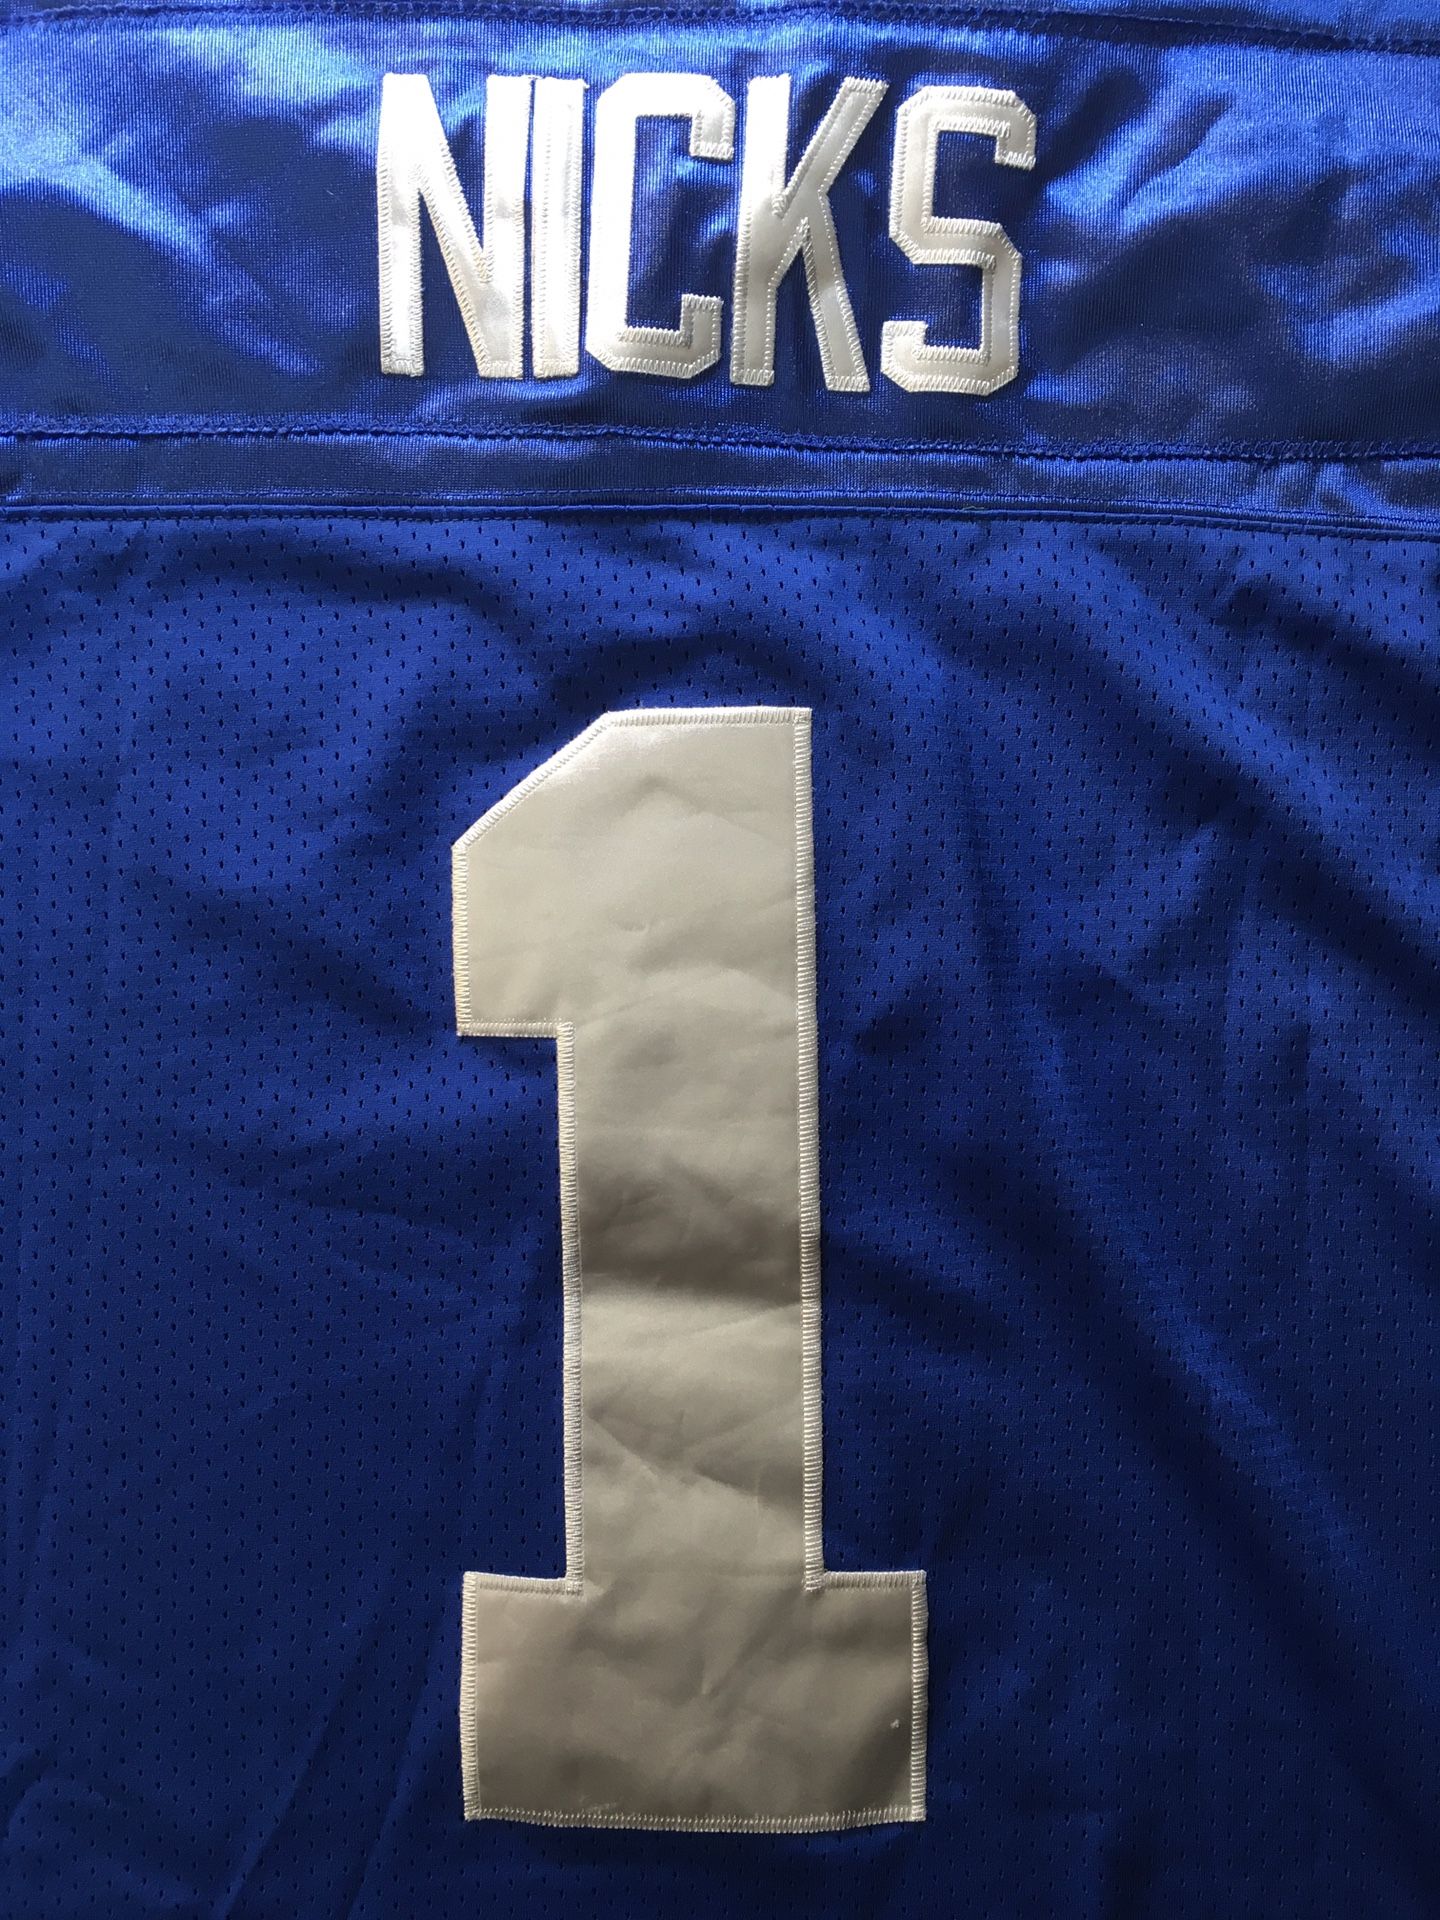 NFL Reebok Size 50 New York Giants Hakeem Nicks #1 Football Jersey RARE stitched. Condition is pre-owned. No apparent rips, tears, stains. 2009 NFL